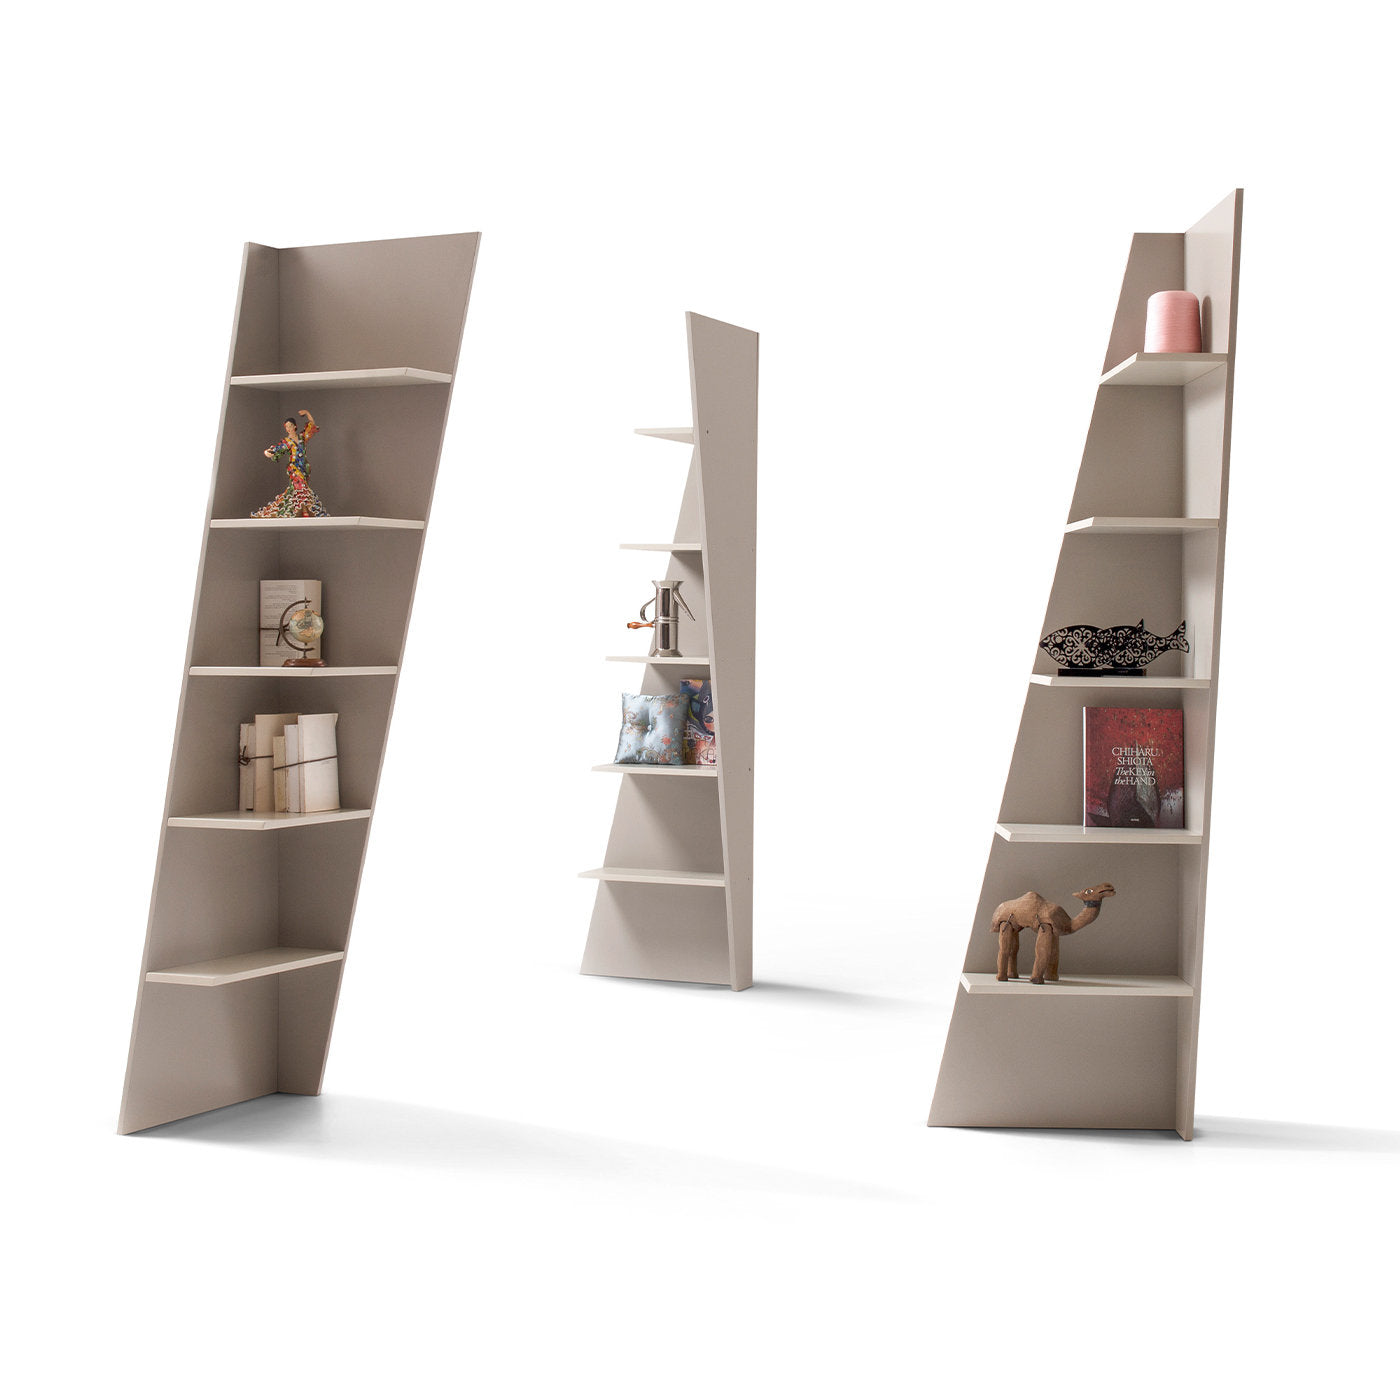 Esquina White Angular Bookcase by My_Lab - Alternative view 1